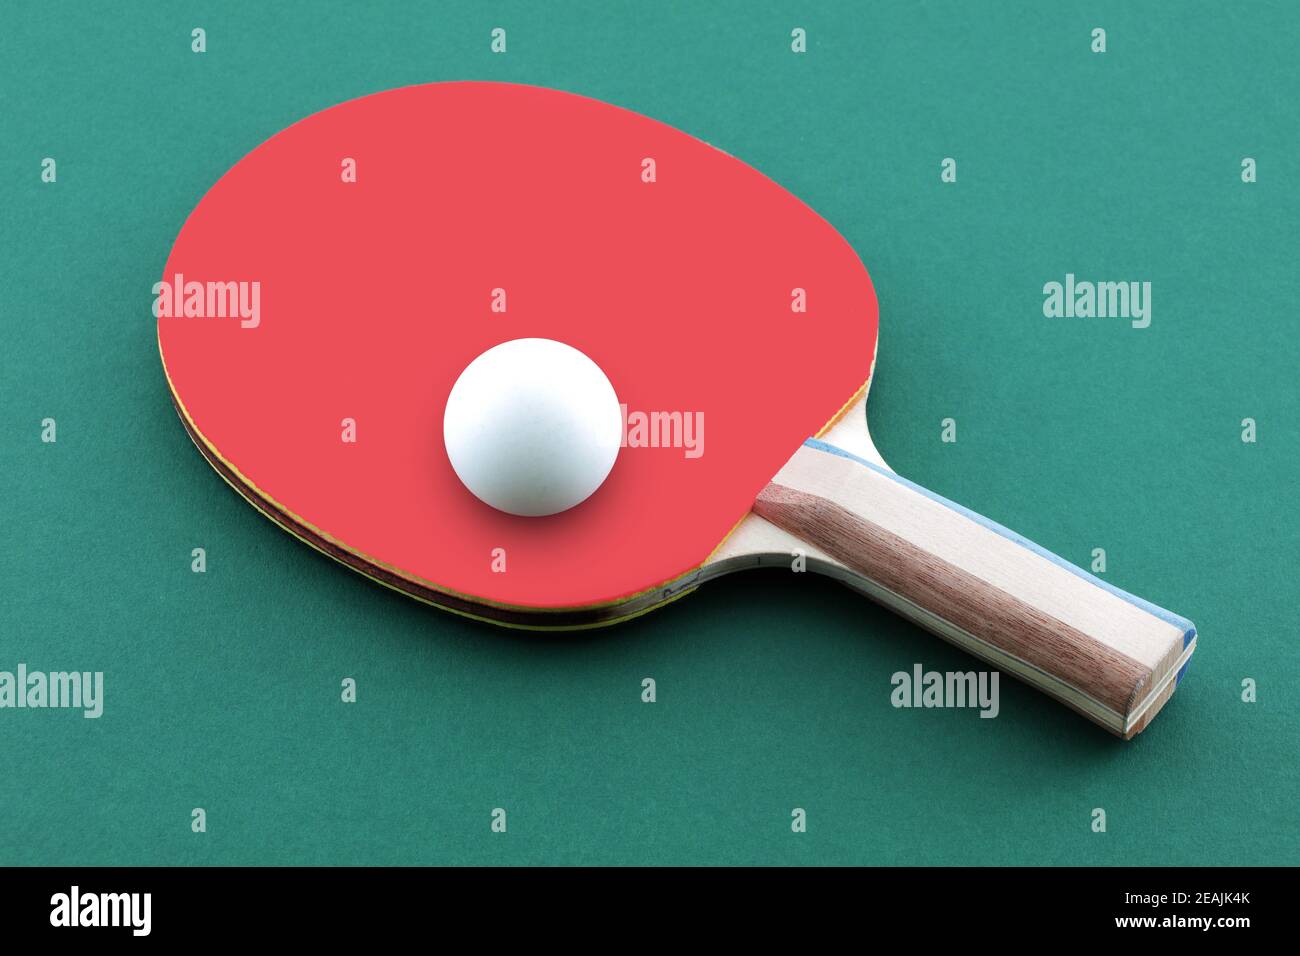 Green ping pong table with ball resting on a table tennis bat paddle Stock Photo